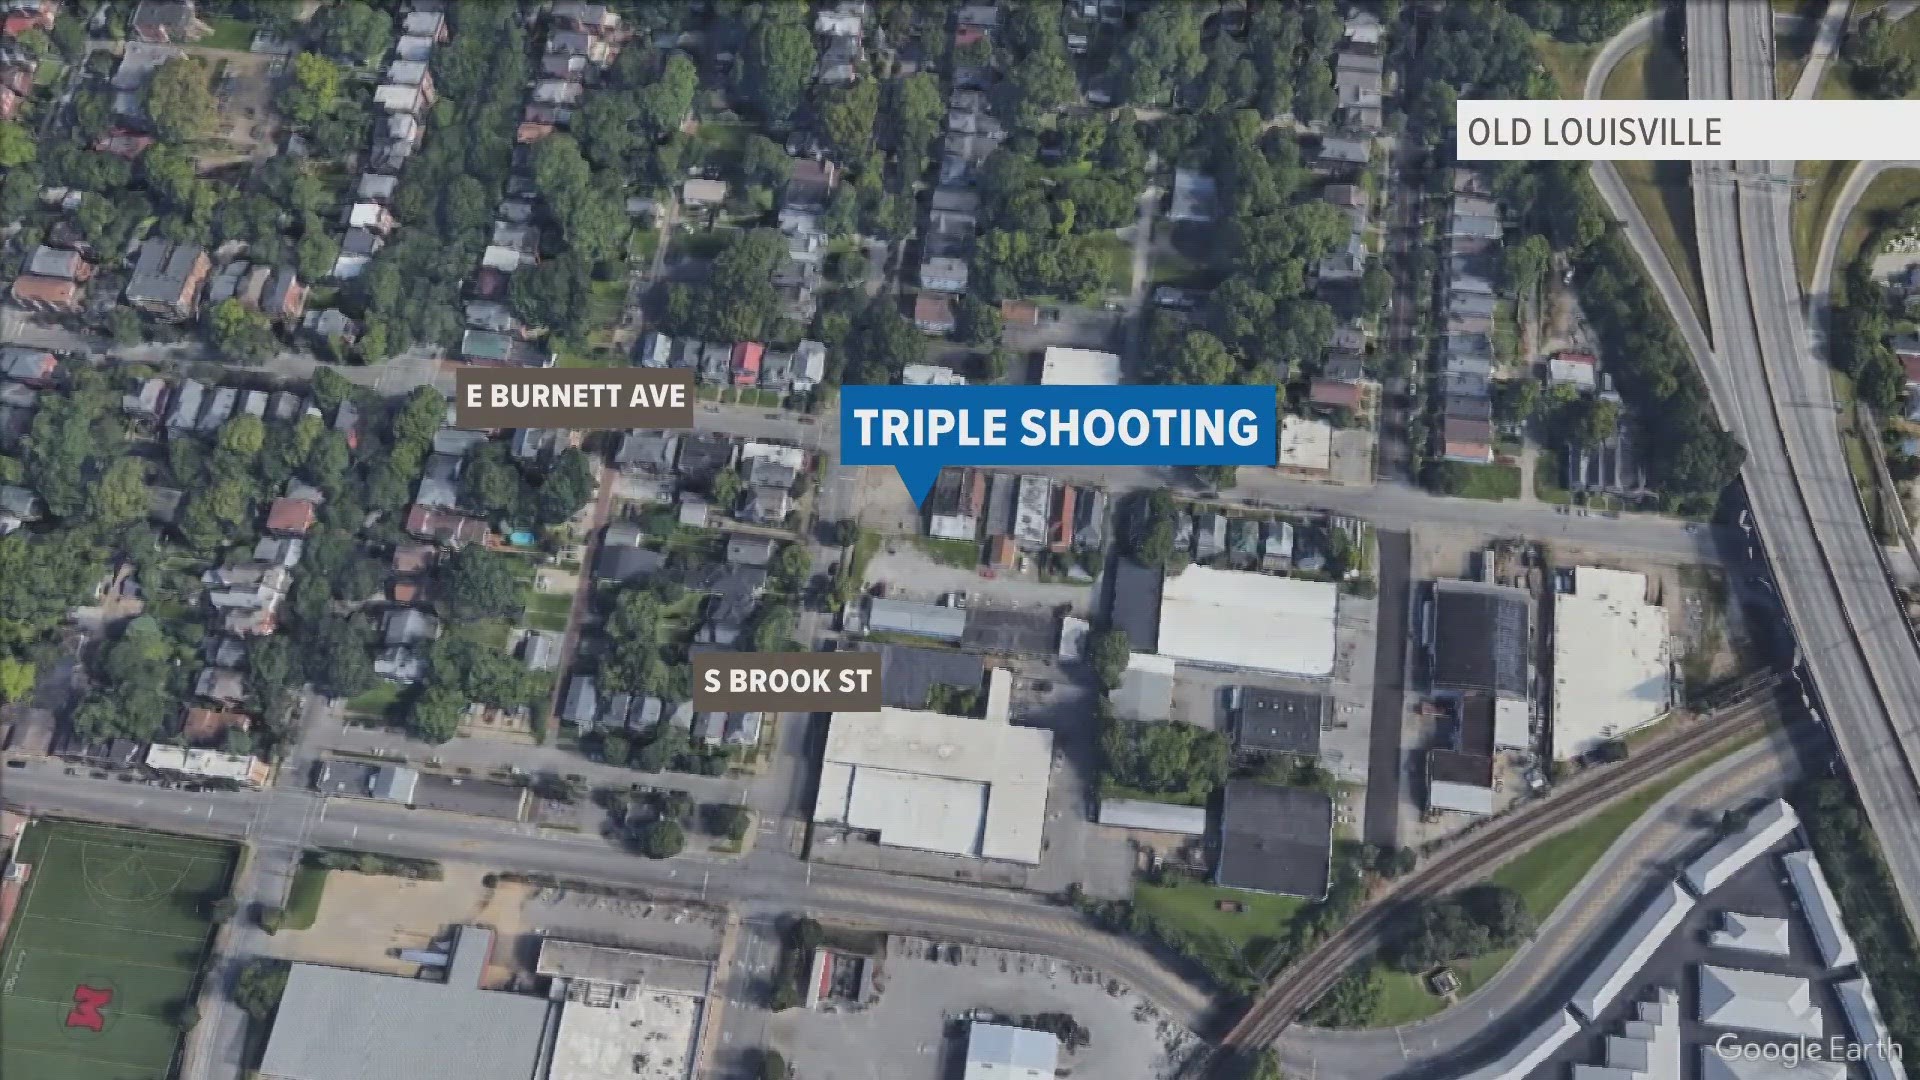 Police are investigating a shooting on East Burnett Avenue that left two victims dead and a woman injured early Saturday.